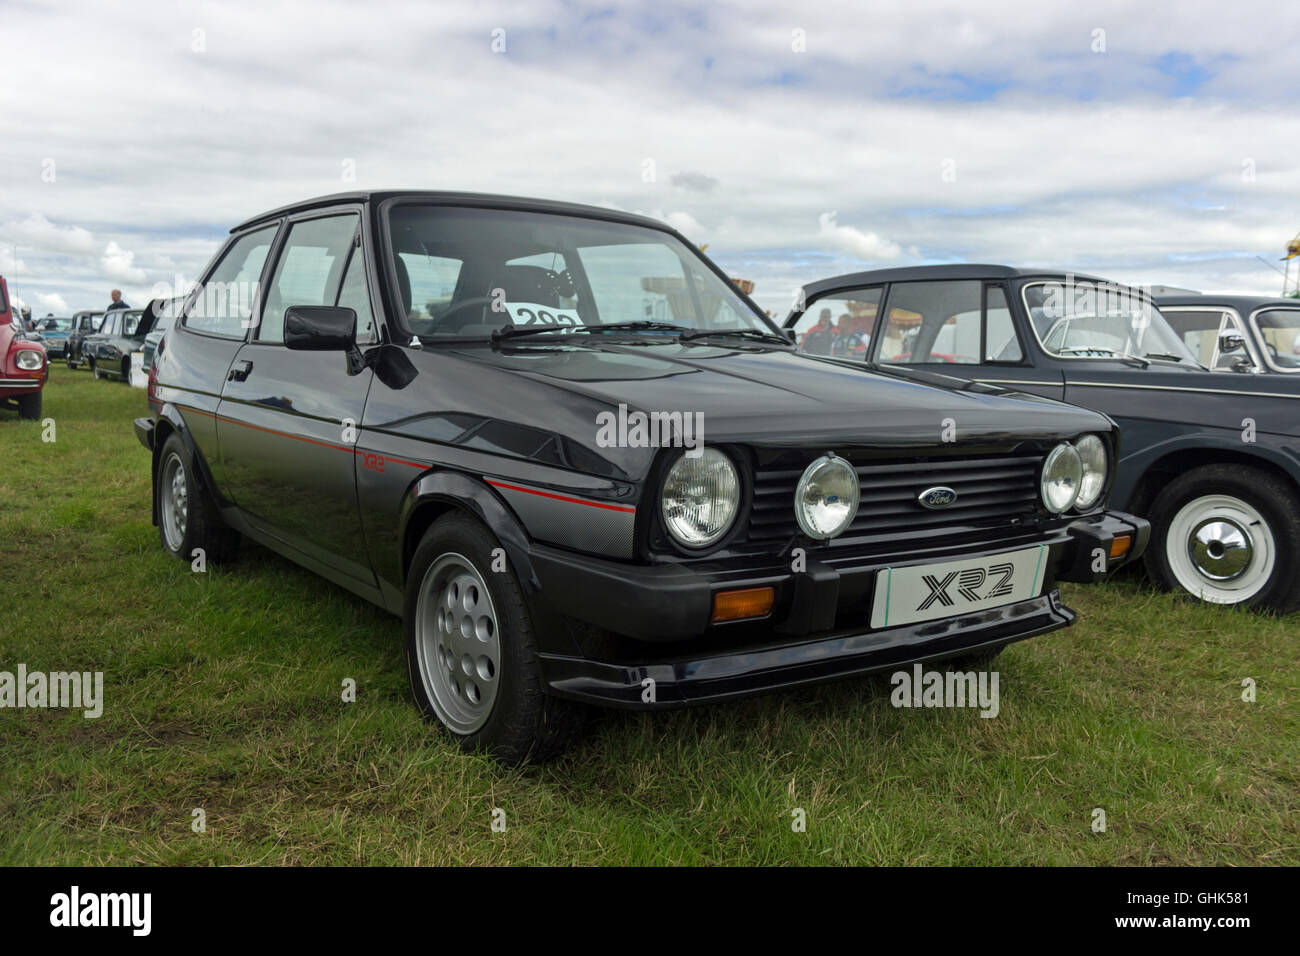 Ford Fiesta XR2 Banque D'Images